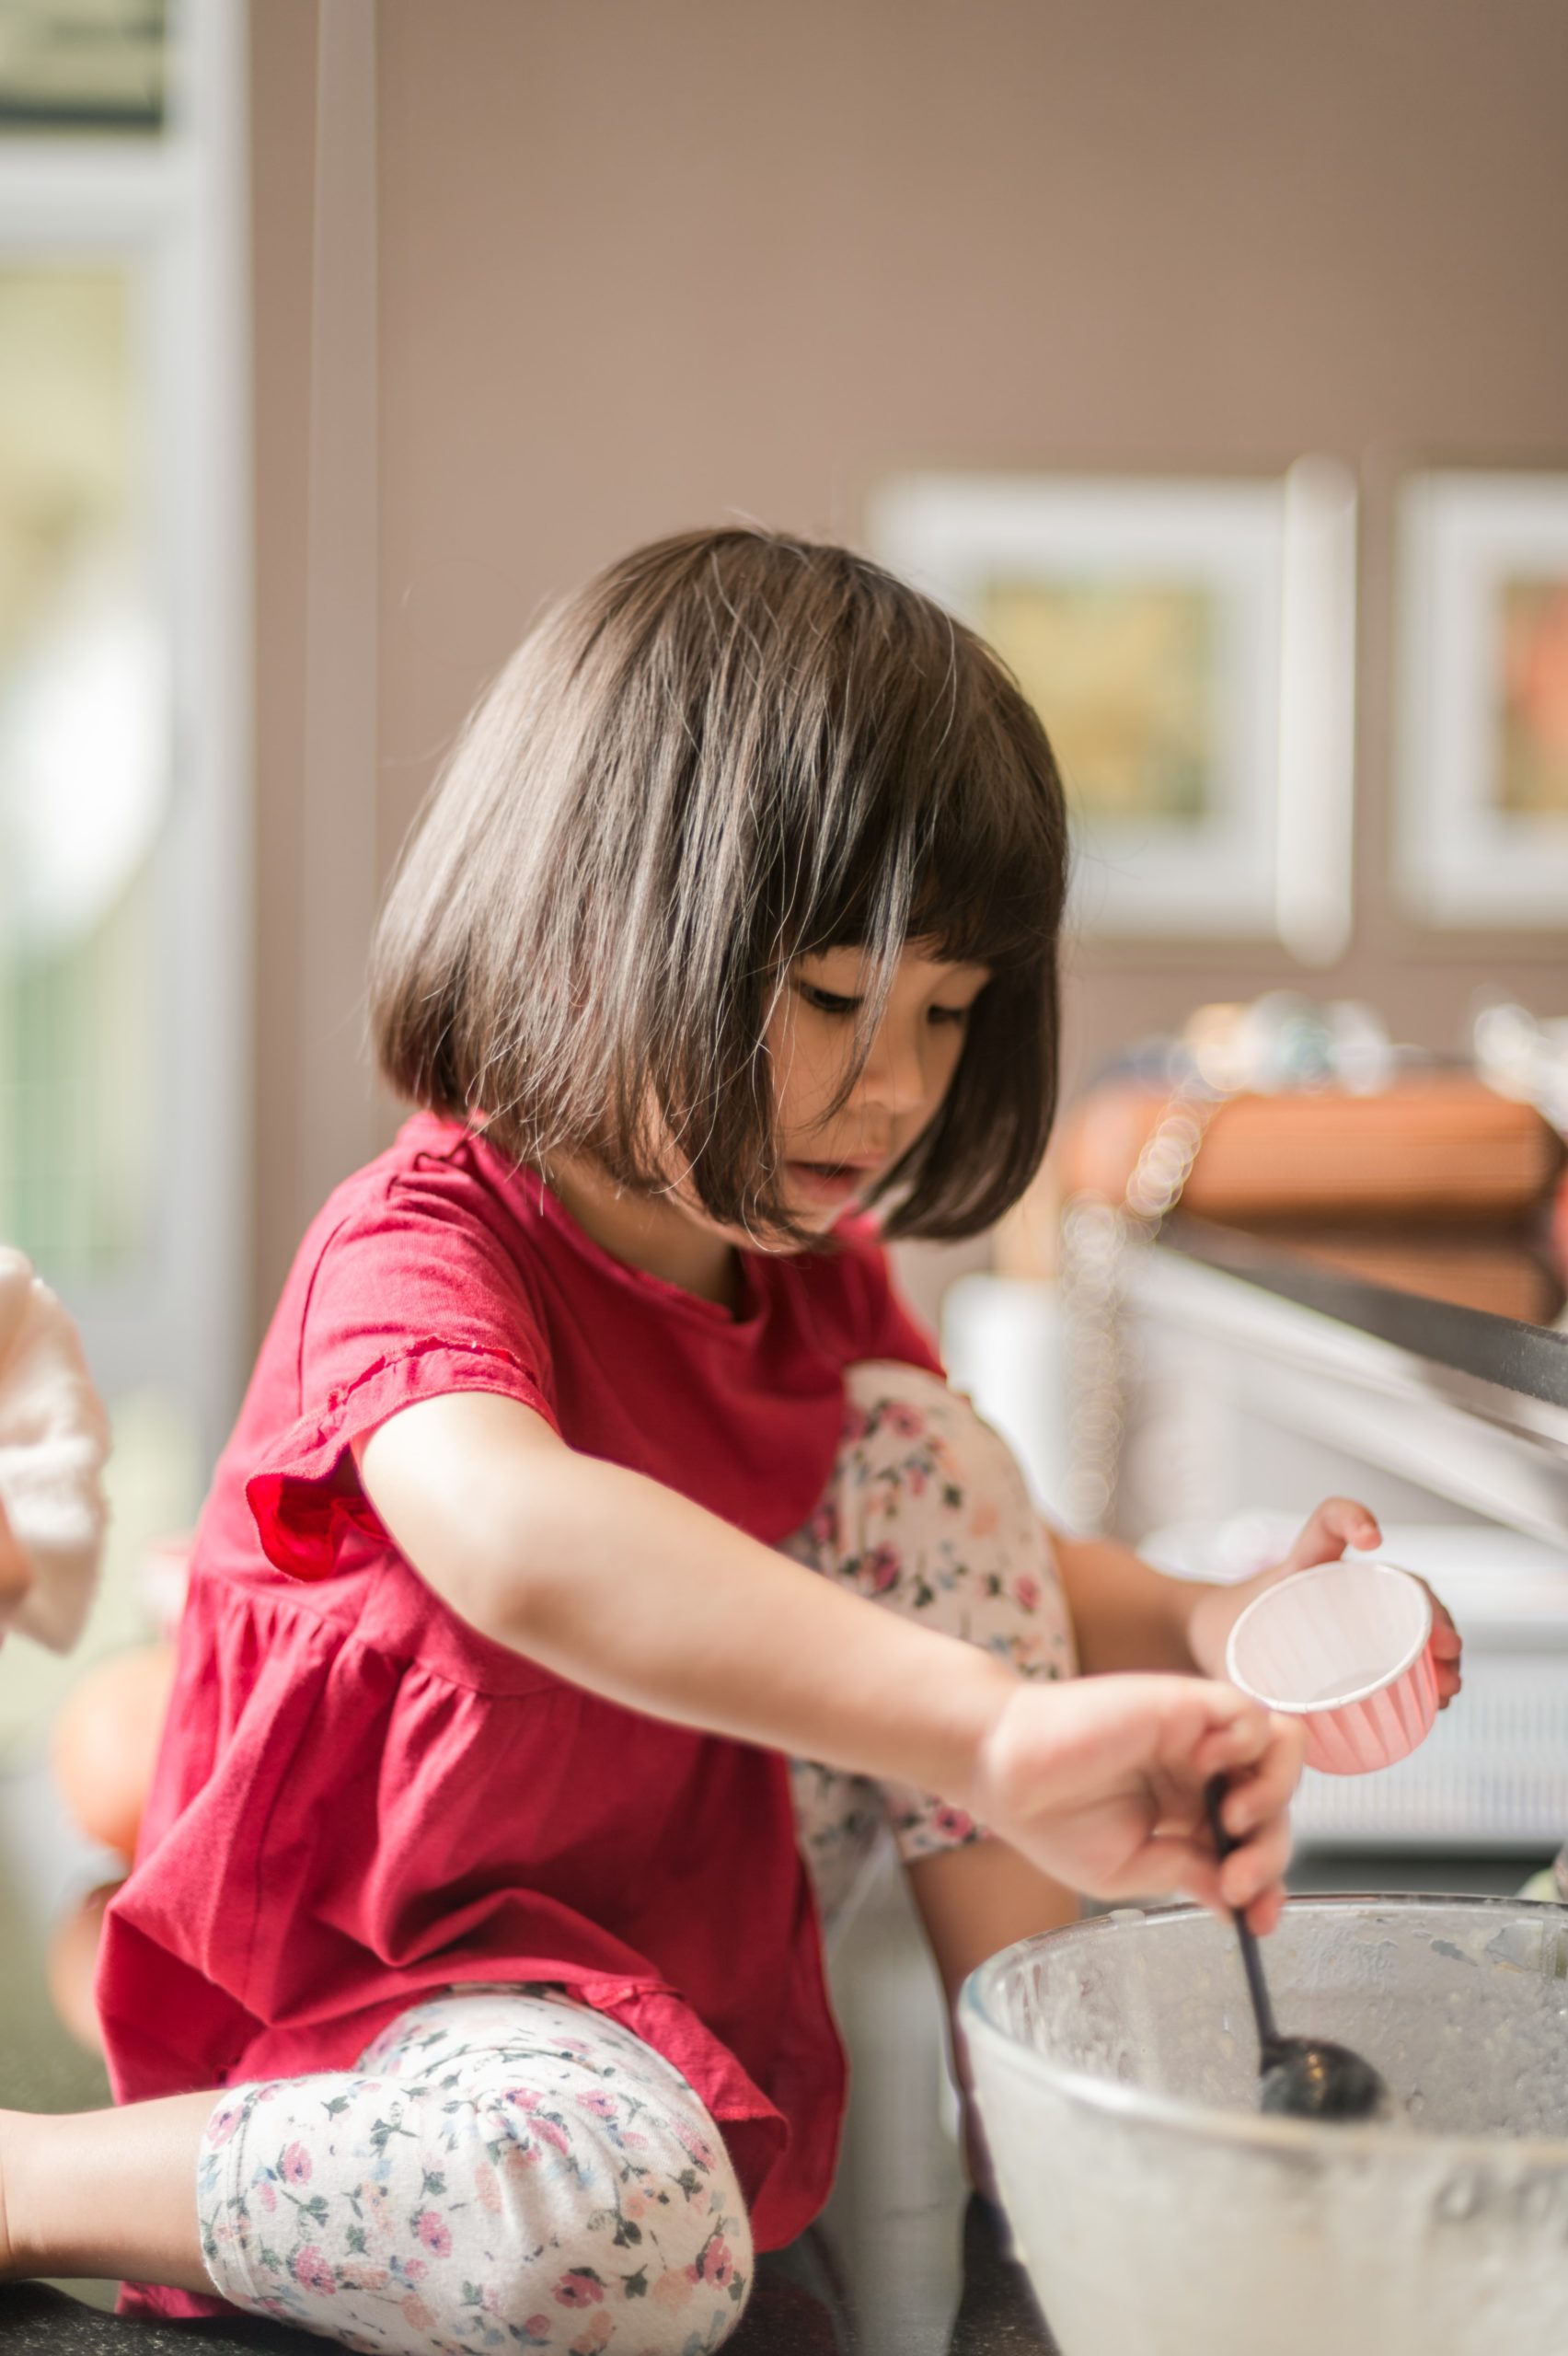 Cover image for blog post showing a child making cupcakes with her family